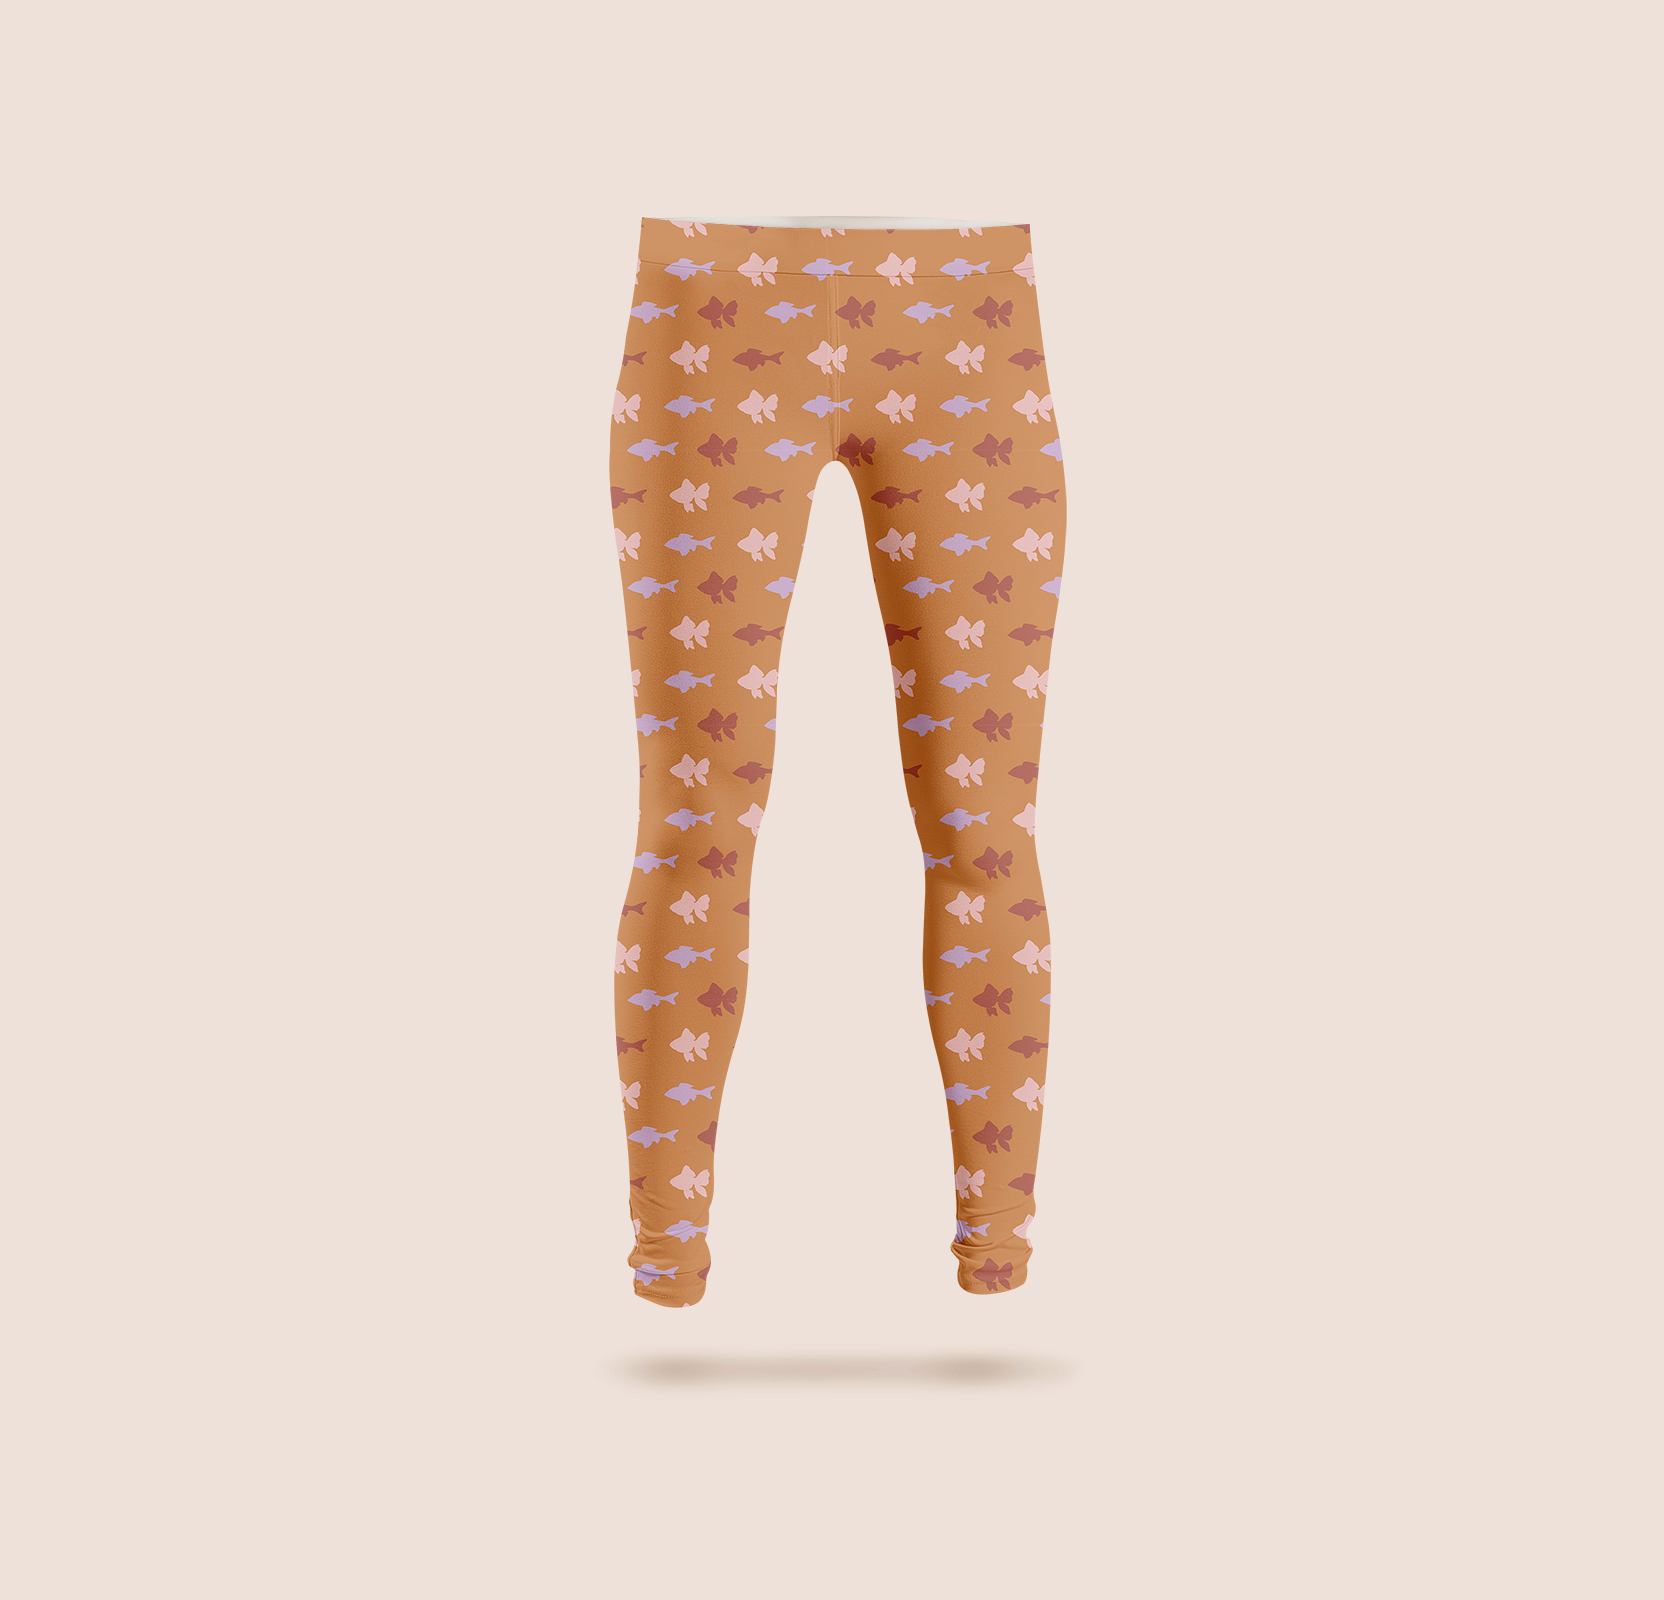 Under the sea coloured in brown pattern design printed on recycled fabric leggings